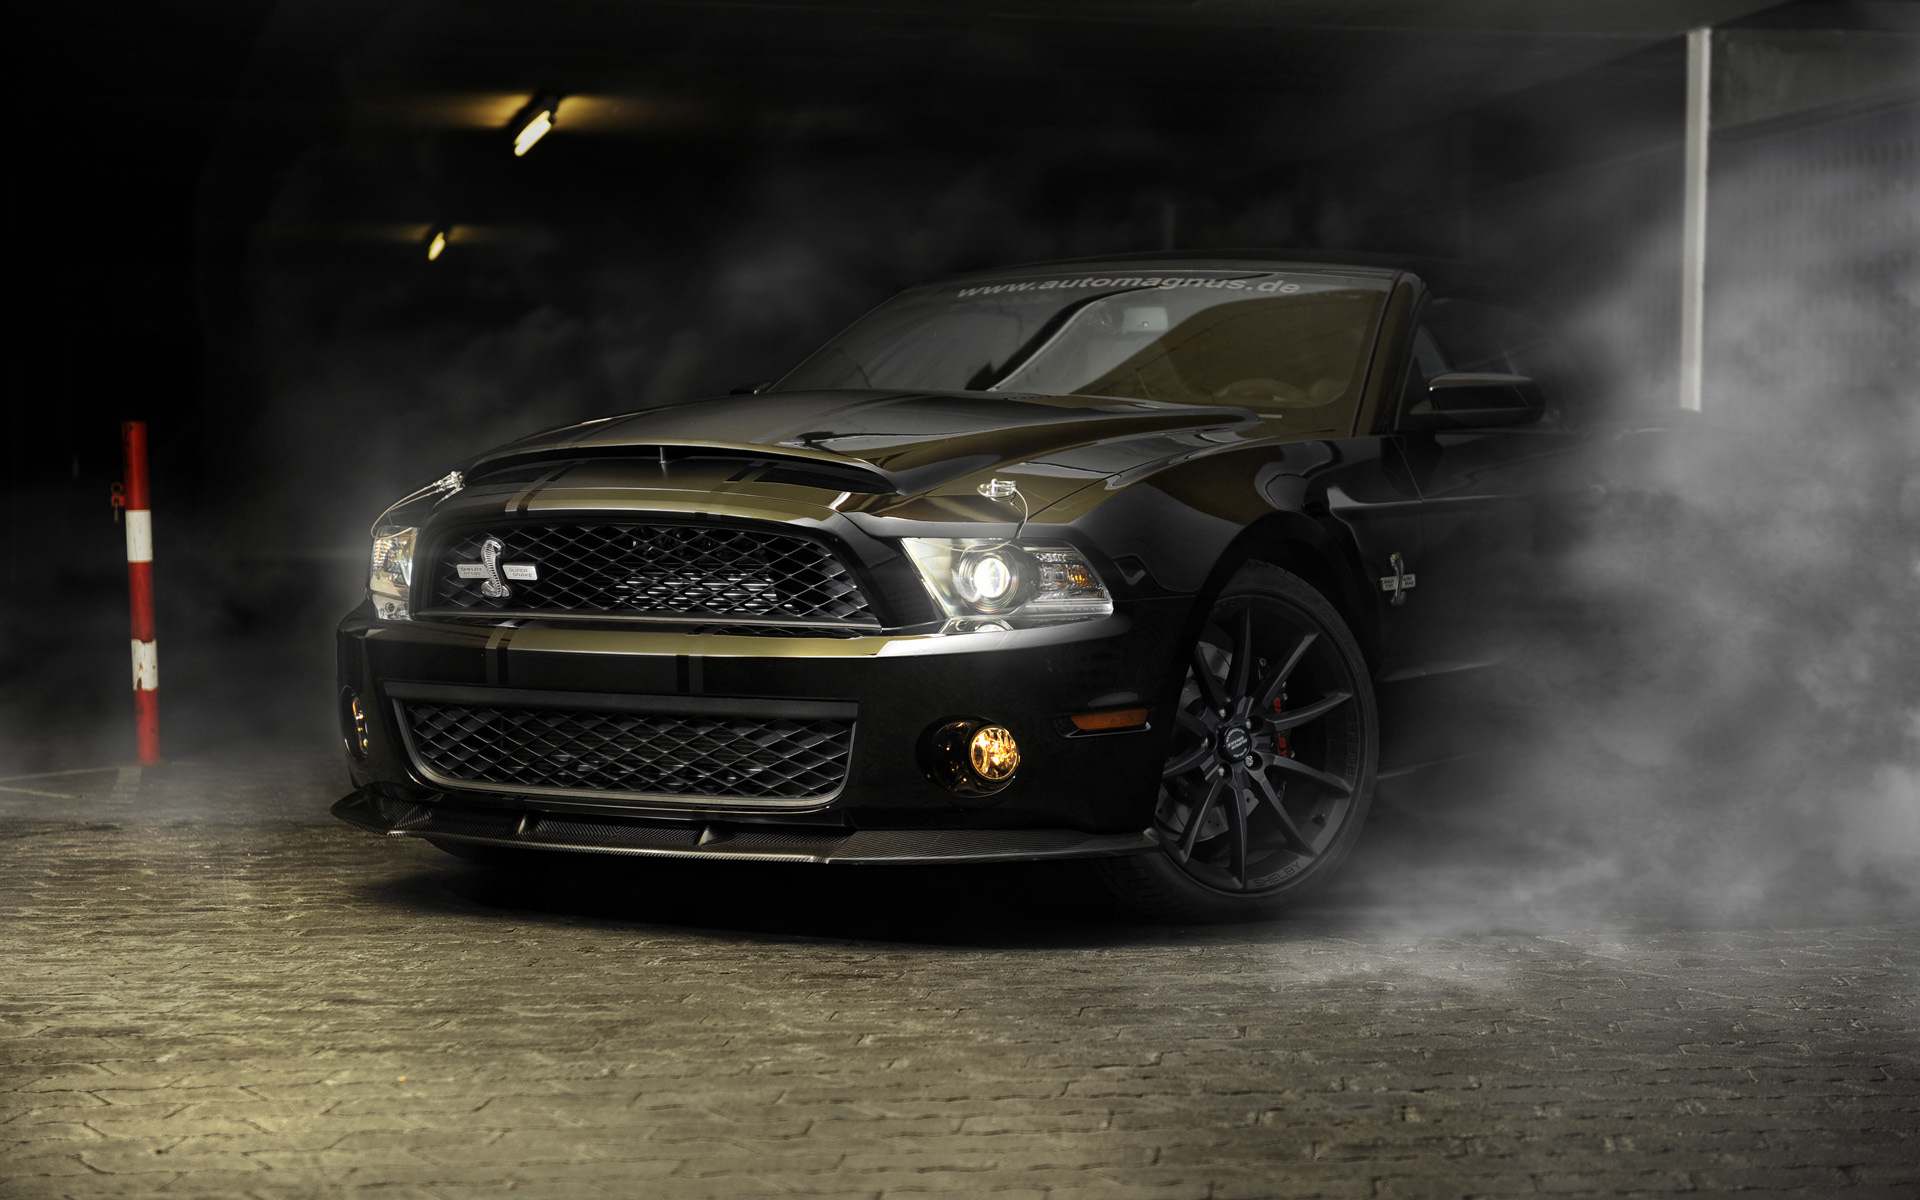 ford, Mustang, Gt500, Super, Snake, Vehicles, Cars, Auto, Smoke, Rubber, Burnout ...1920 x 1200